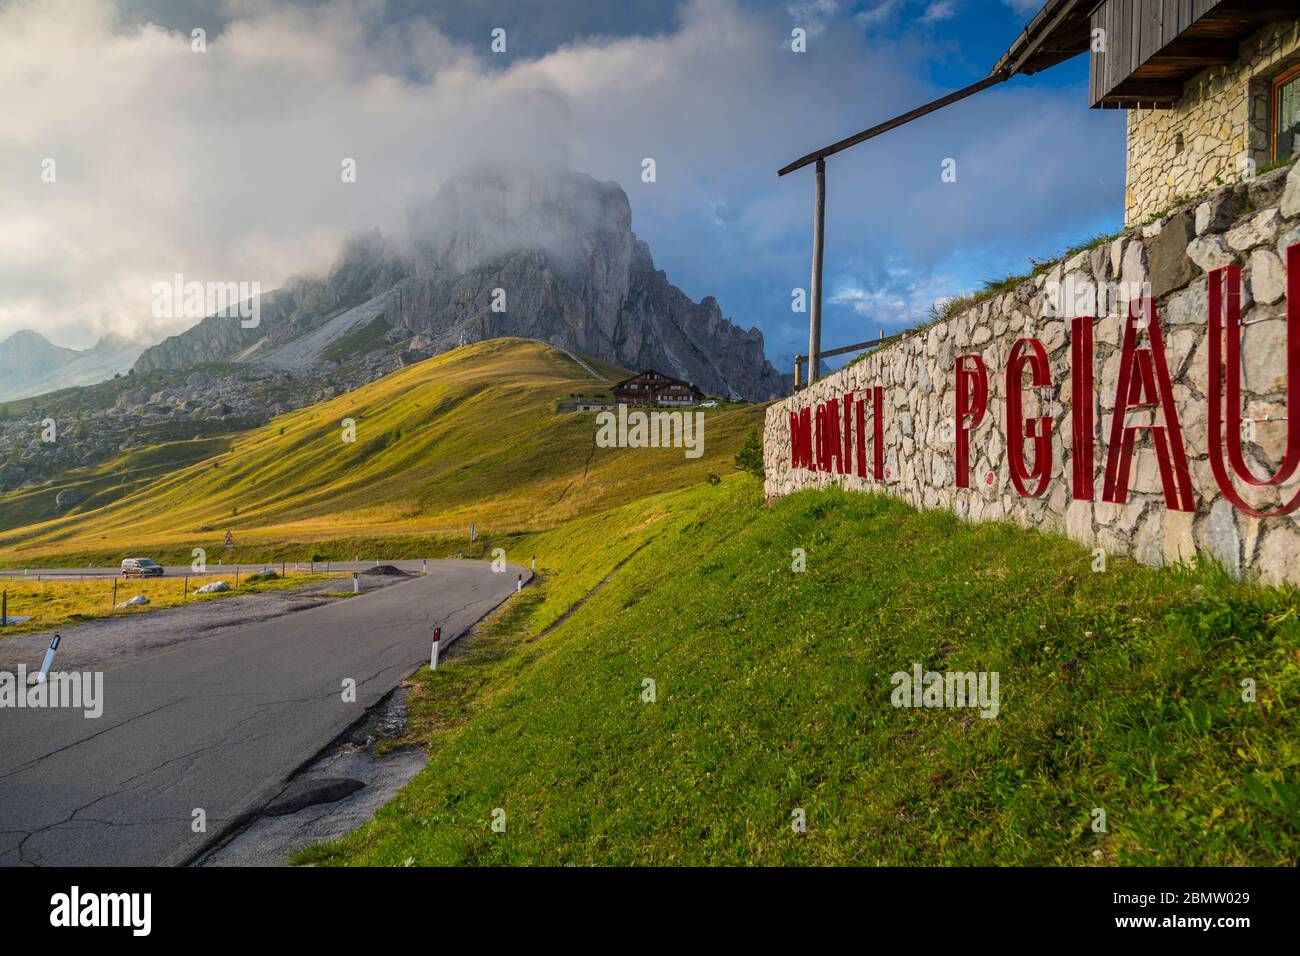 View of landscape and hotel from Marmolada Pass at sunset, South Tyrol, Italian Dolomites, Italy, Europe Stock Photo